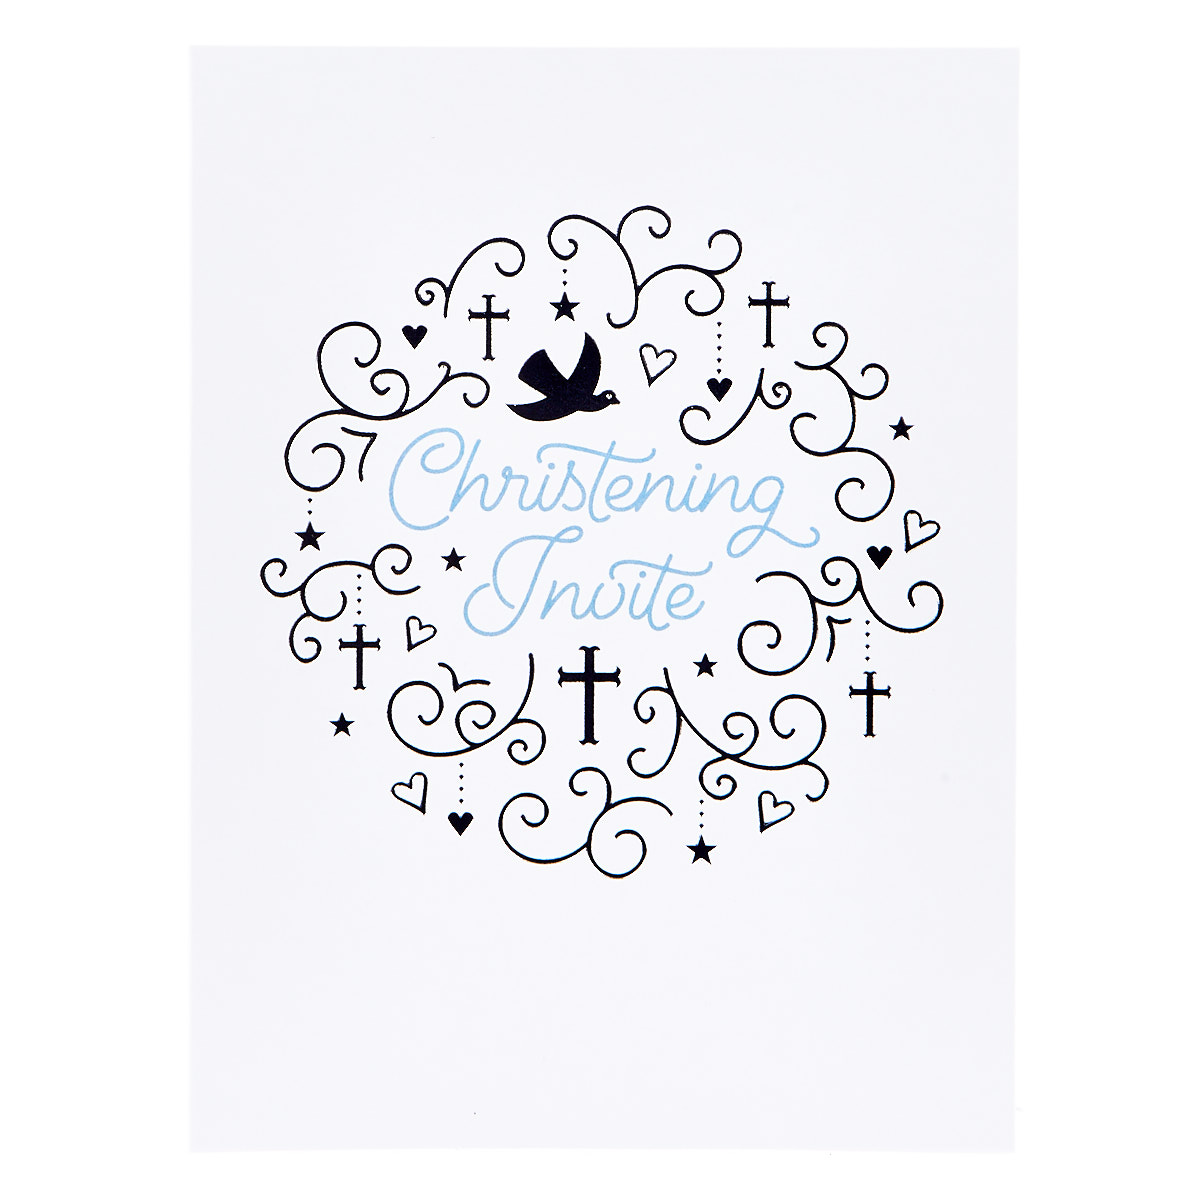 Blue & Silver Christening Invitations - Pack of 12